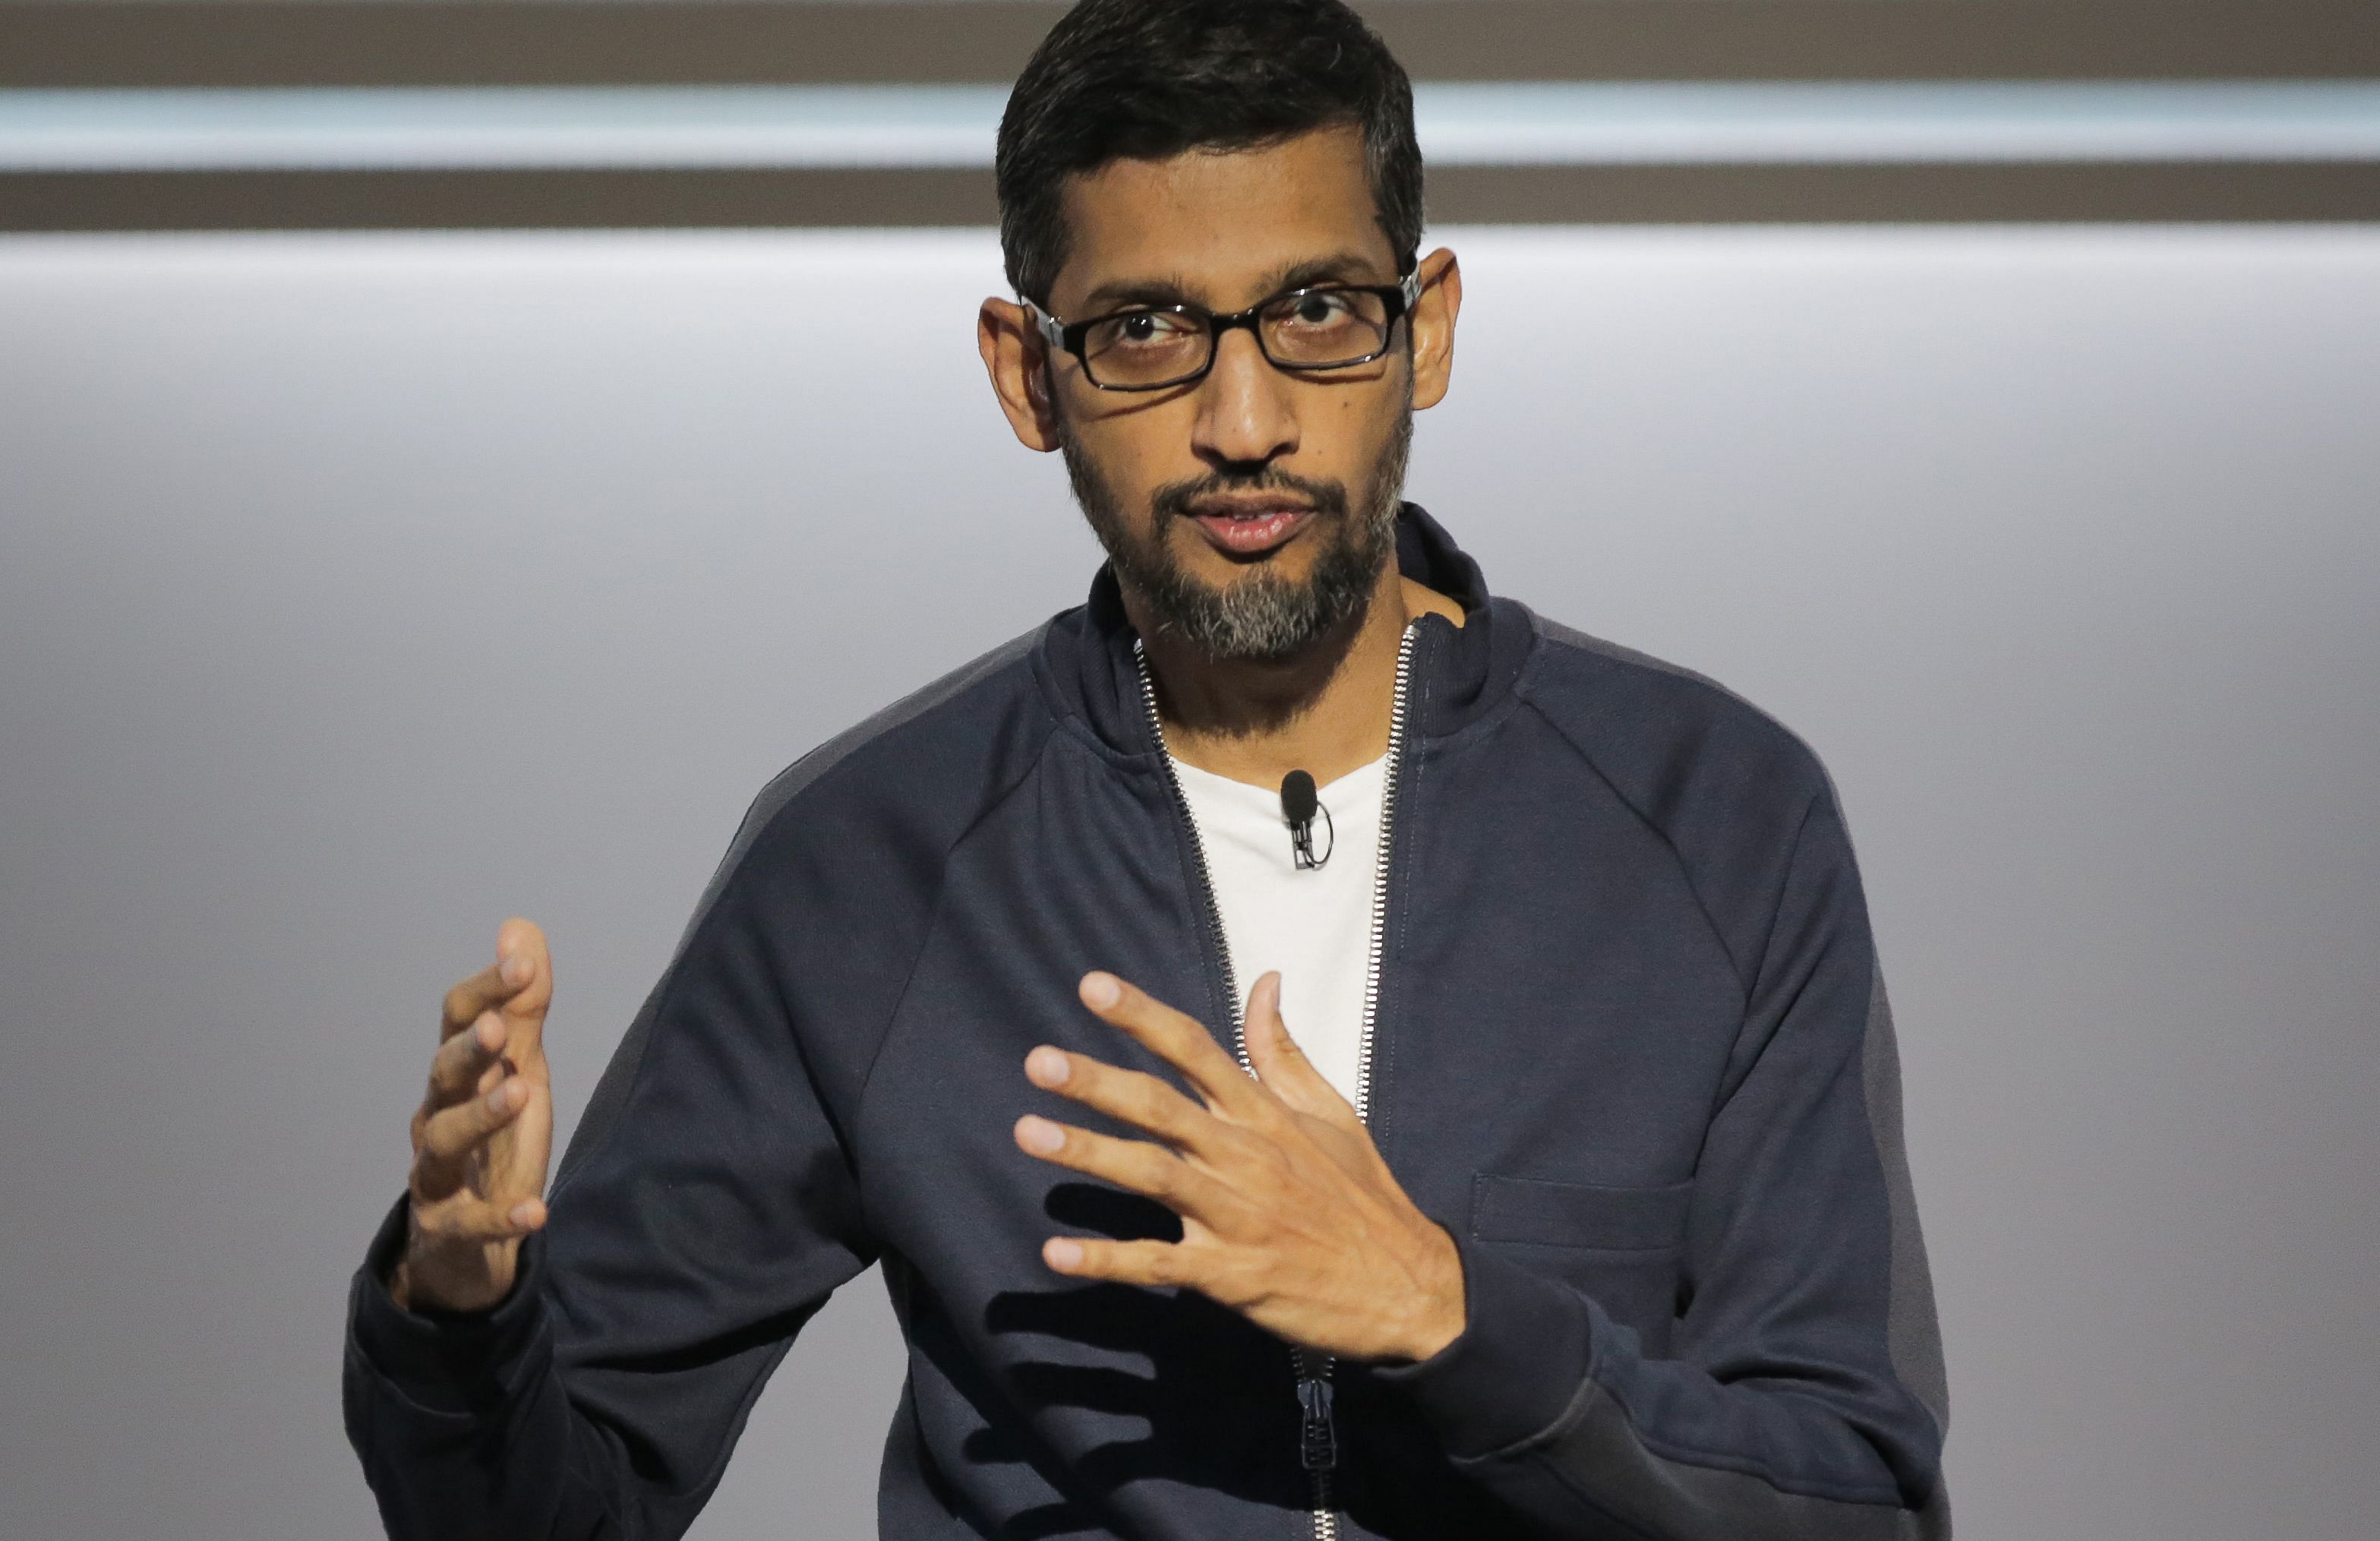 Google CEO Sundar Pichai has expressed disappointment over the proclamation issued by President Donald Trump that temporarily suspends foreign work visas including H-1B. Credit: AFP